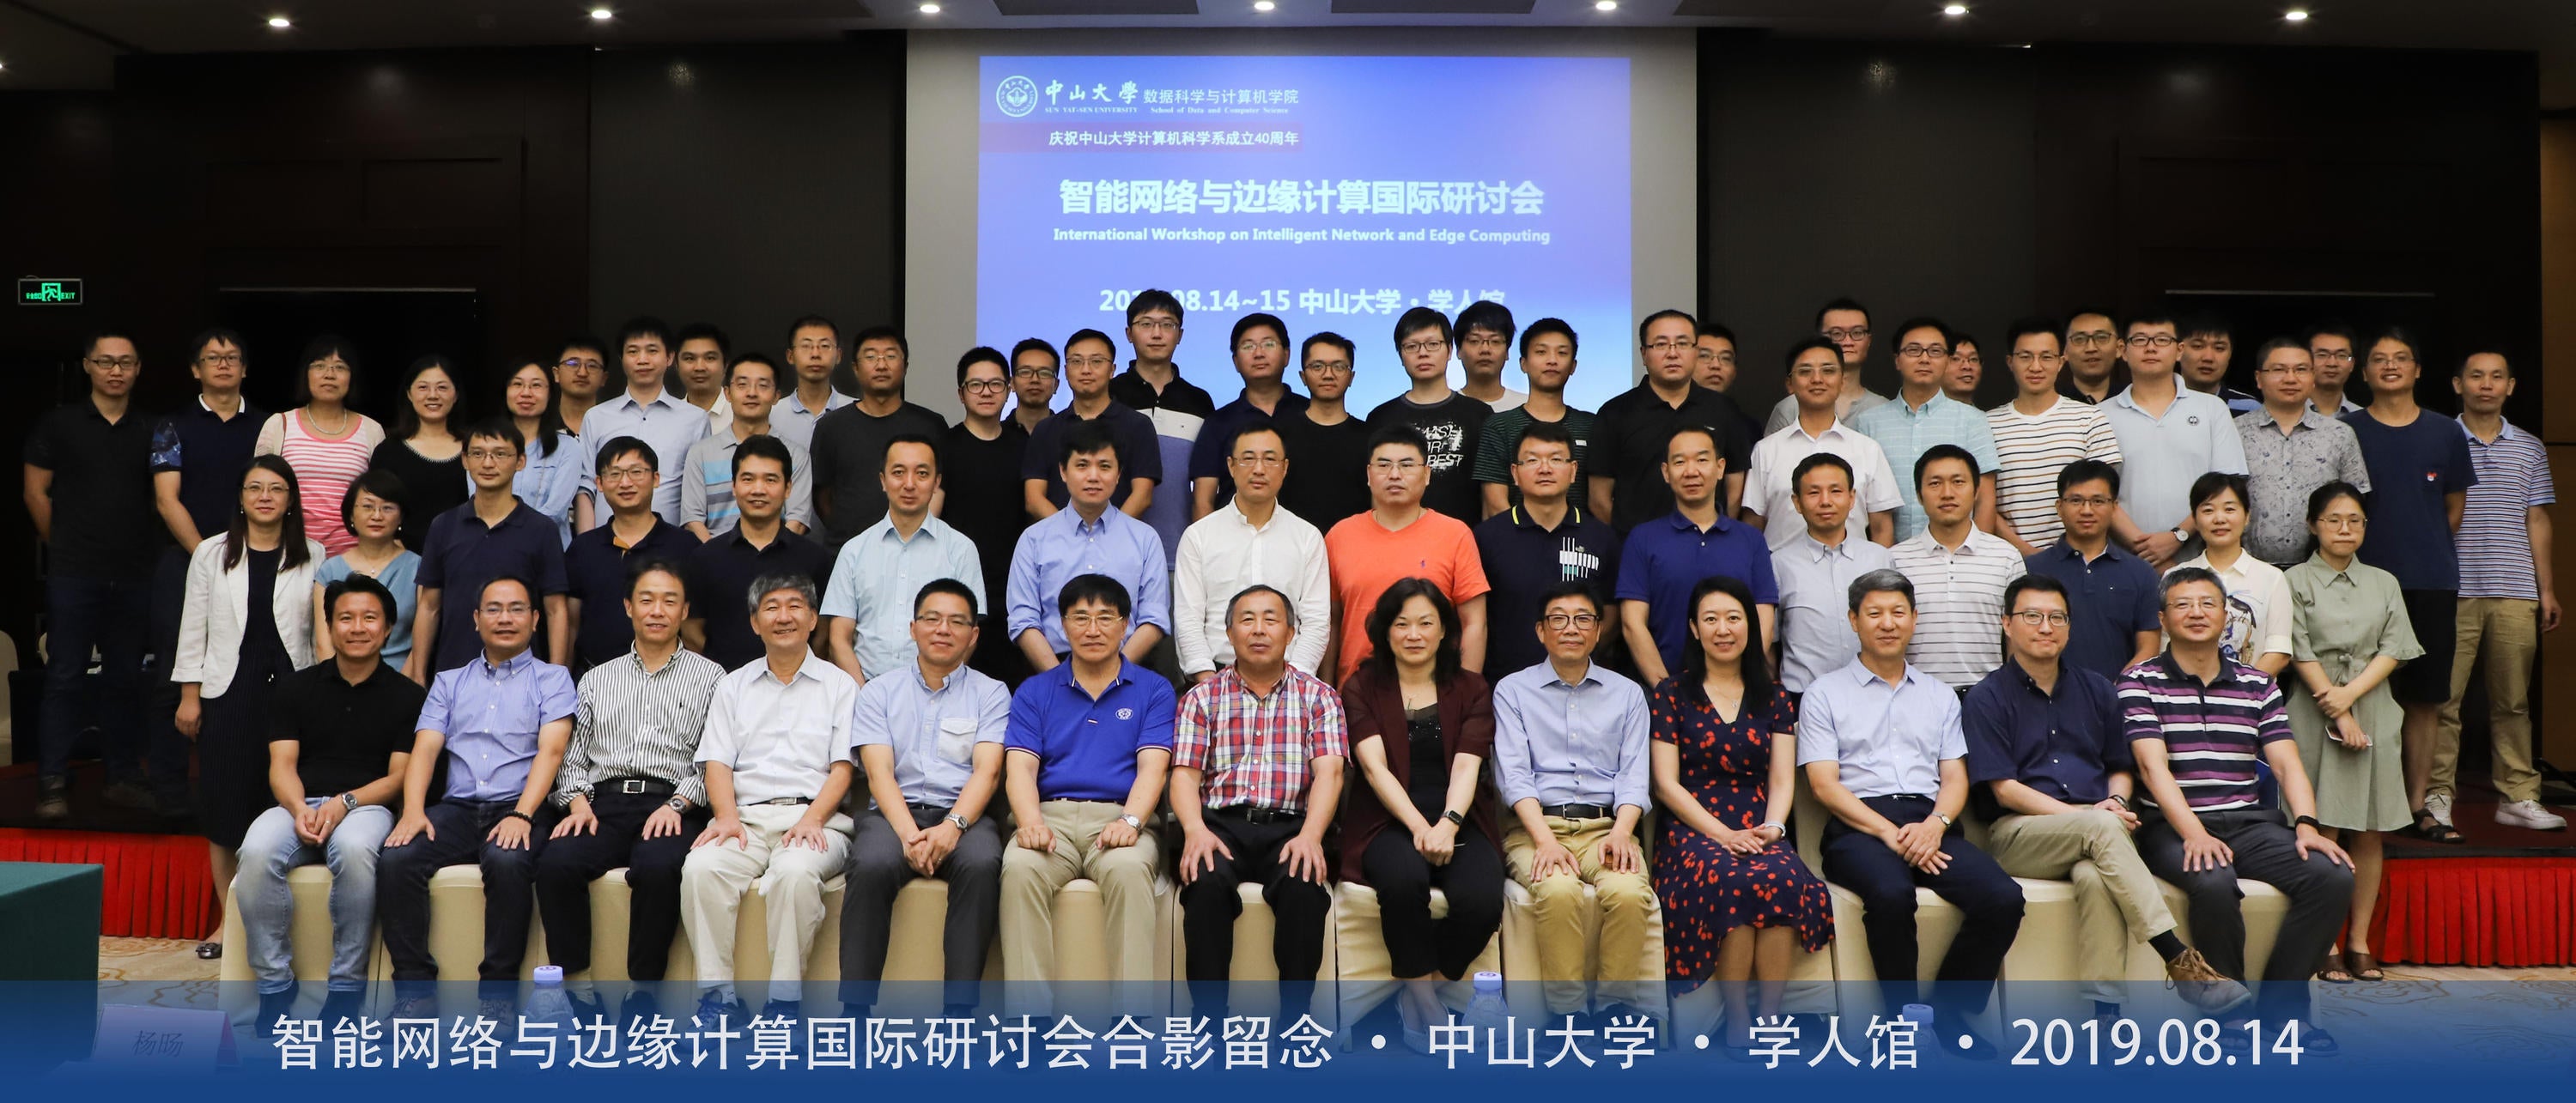 Prof. Shen and former BBCR members attended the International Workshop on Intelligent Networks and Edge Computing